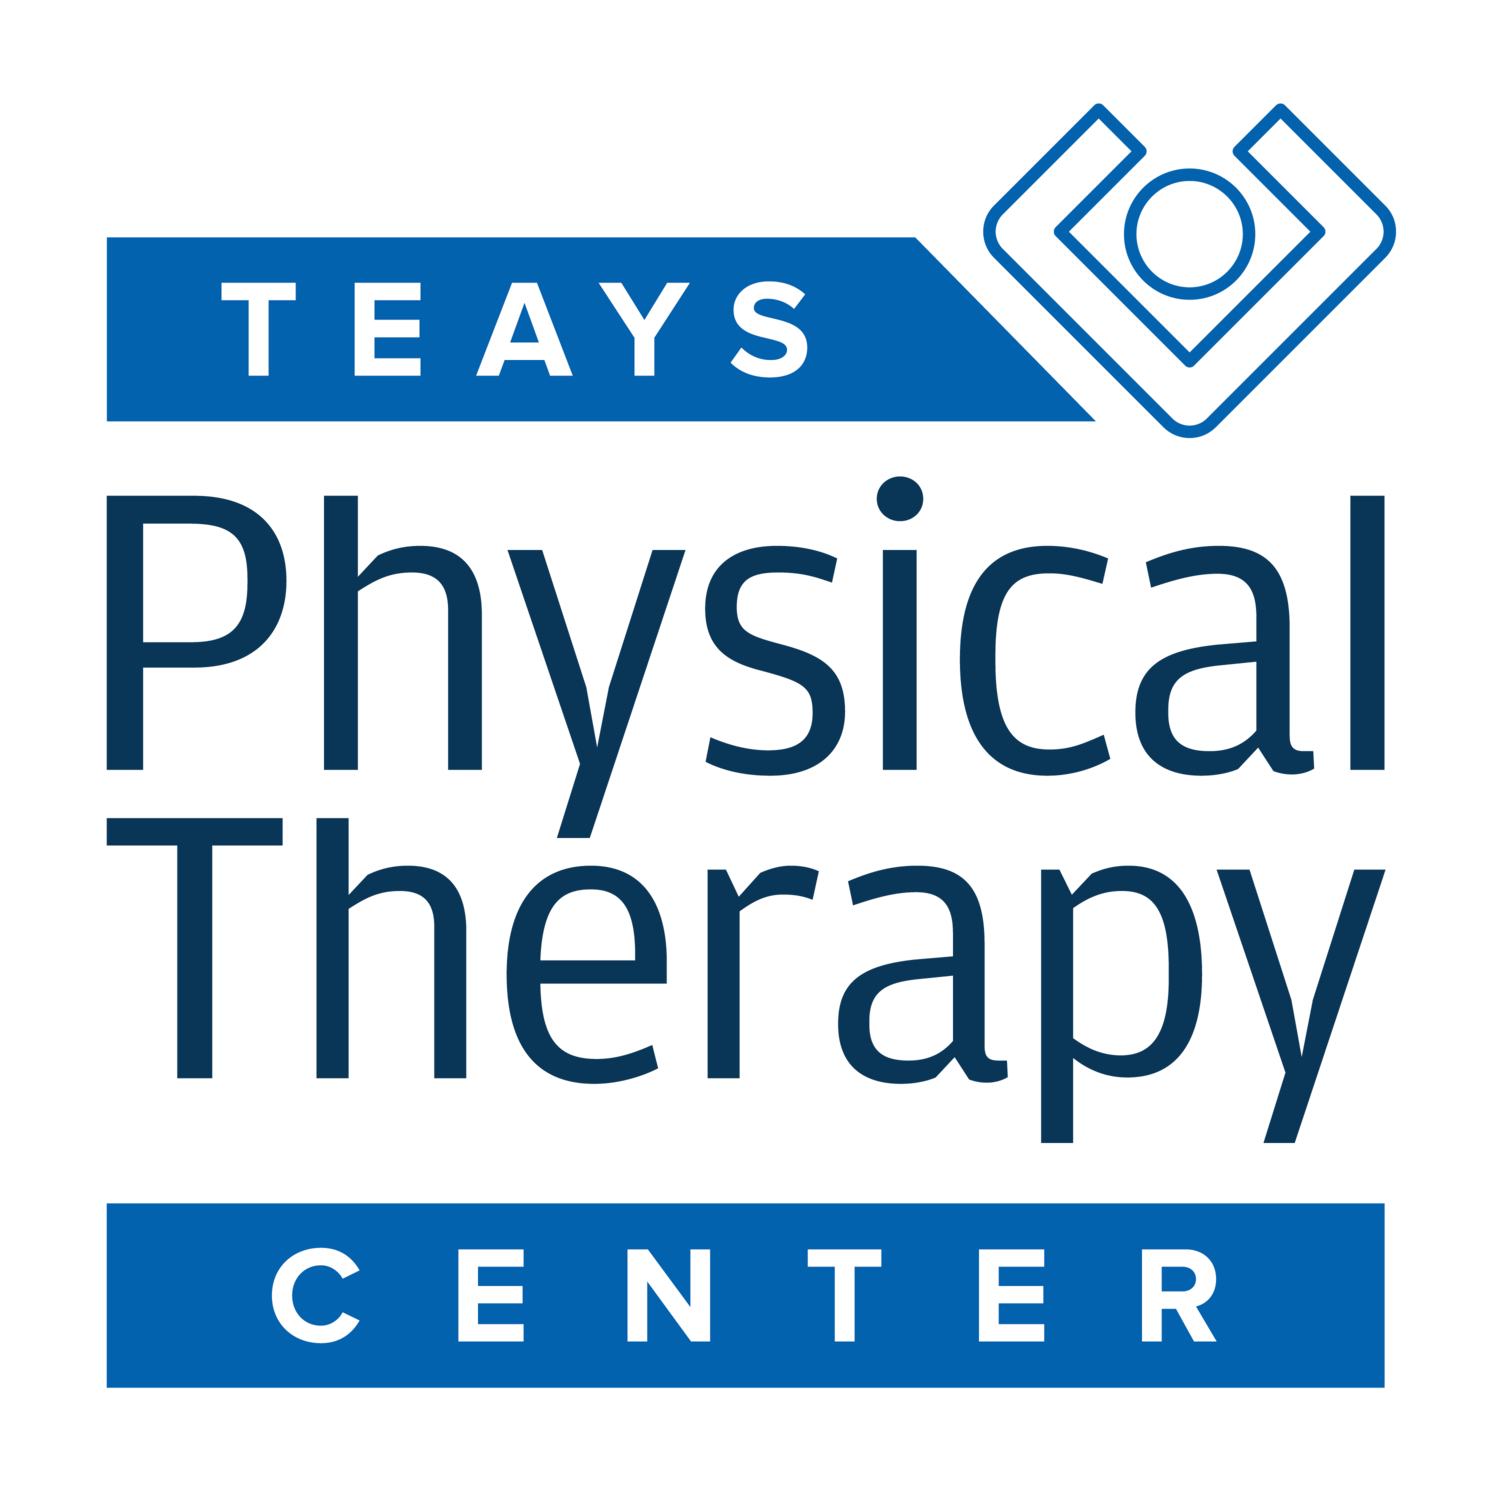 Teays Physical Therapy Center